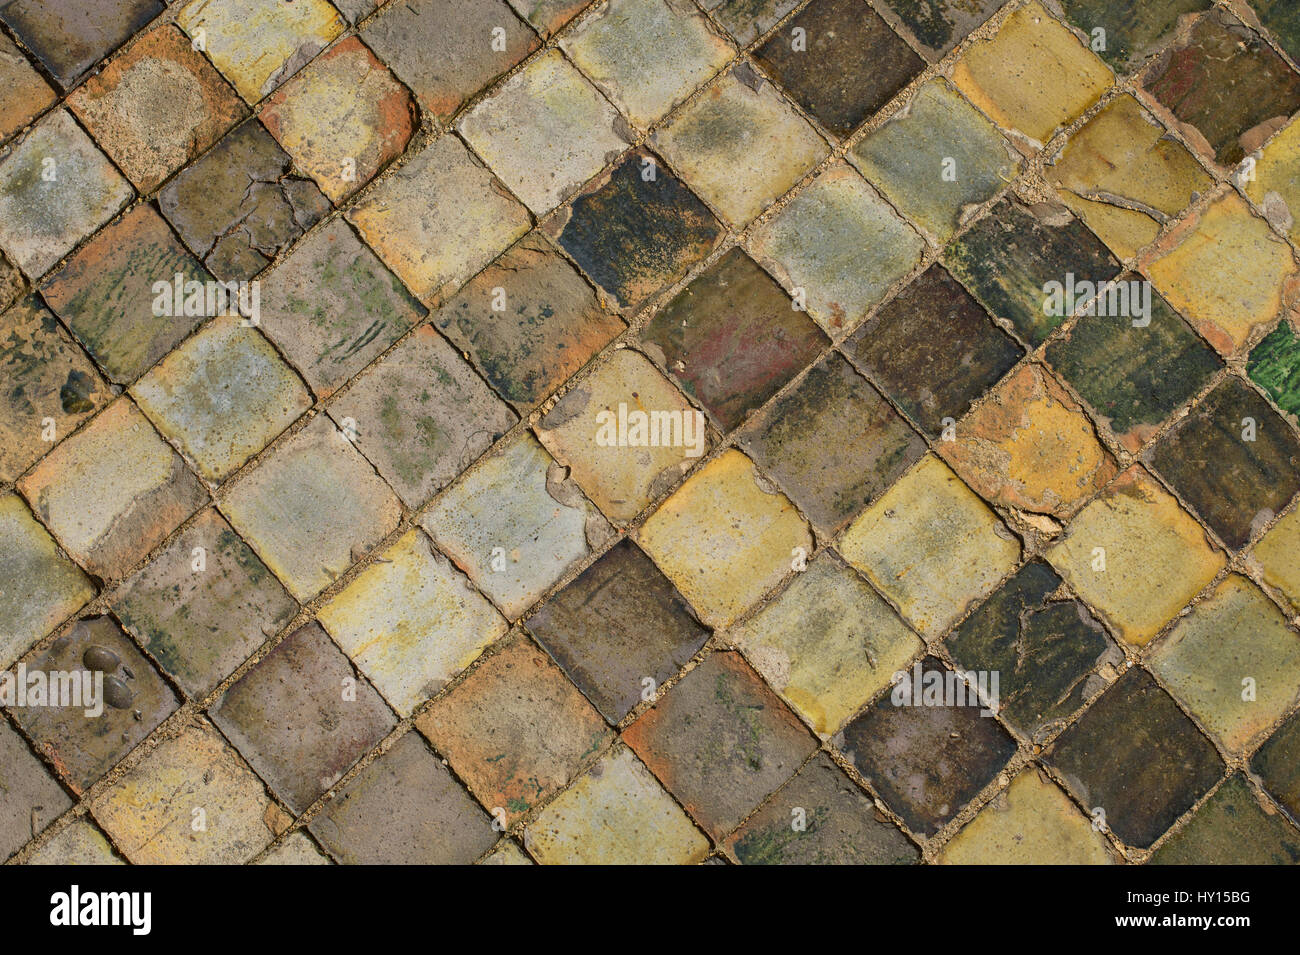 Medieval ceramic floor tiles in the ruins of Byland Cistercian Abbey, Ryedale, North Yorkshire, England Stock Photo